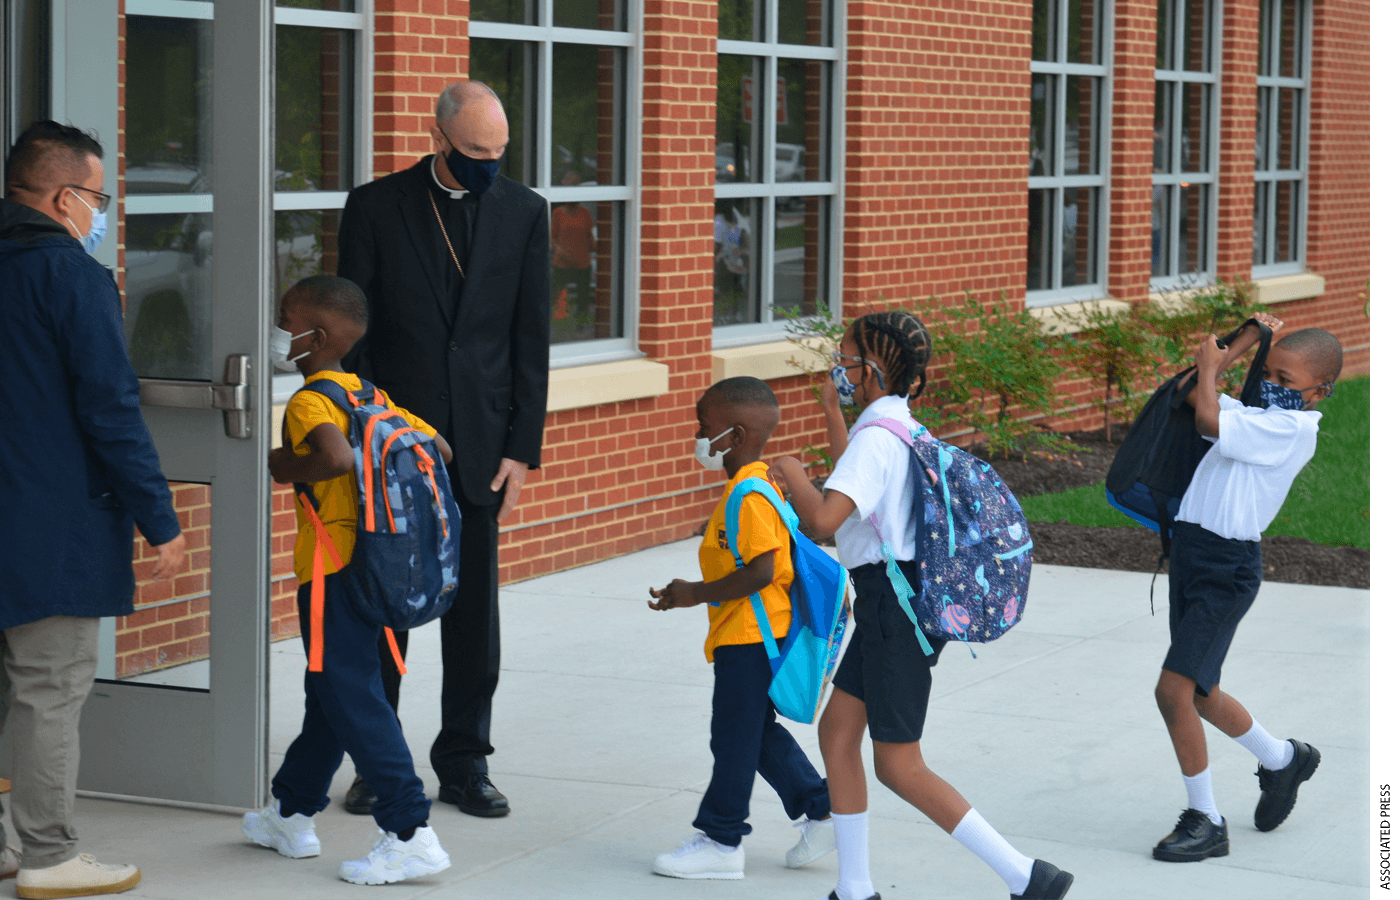 Youngsters enter the first new Catholic school built in Baltimore in roughly 60 years with a mix of enthusiasm and first-day-back jitters, Monday Aug. 30, 2021.